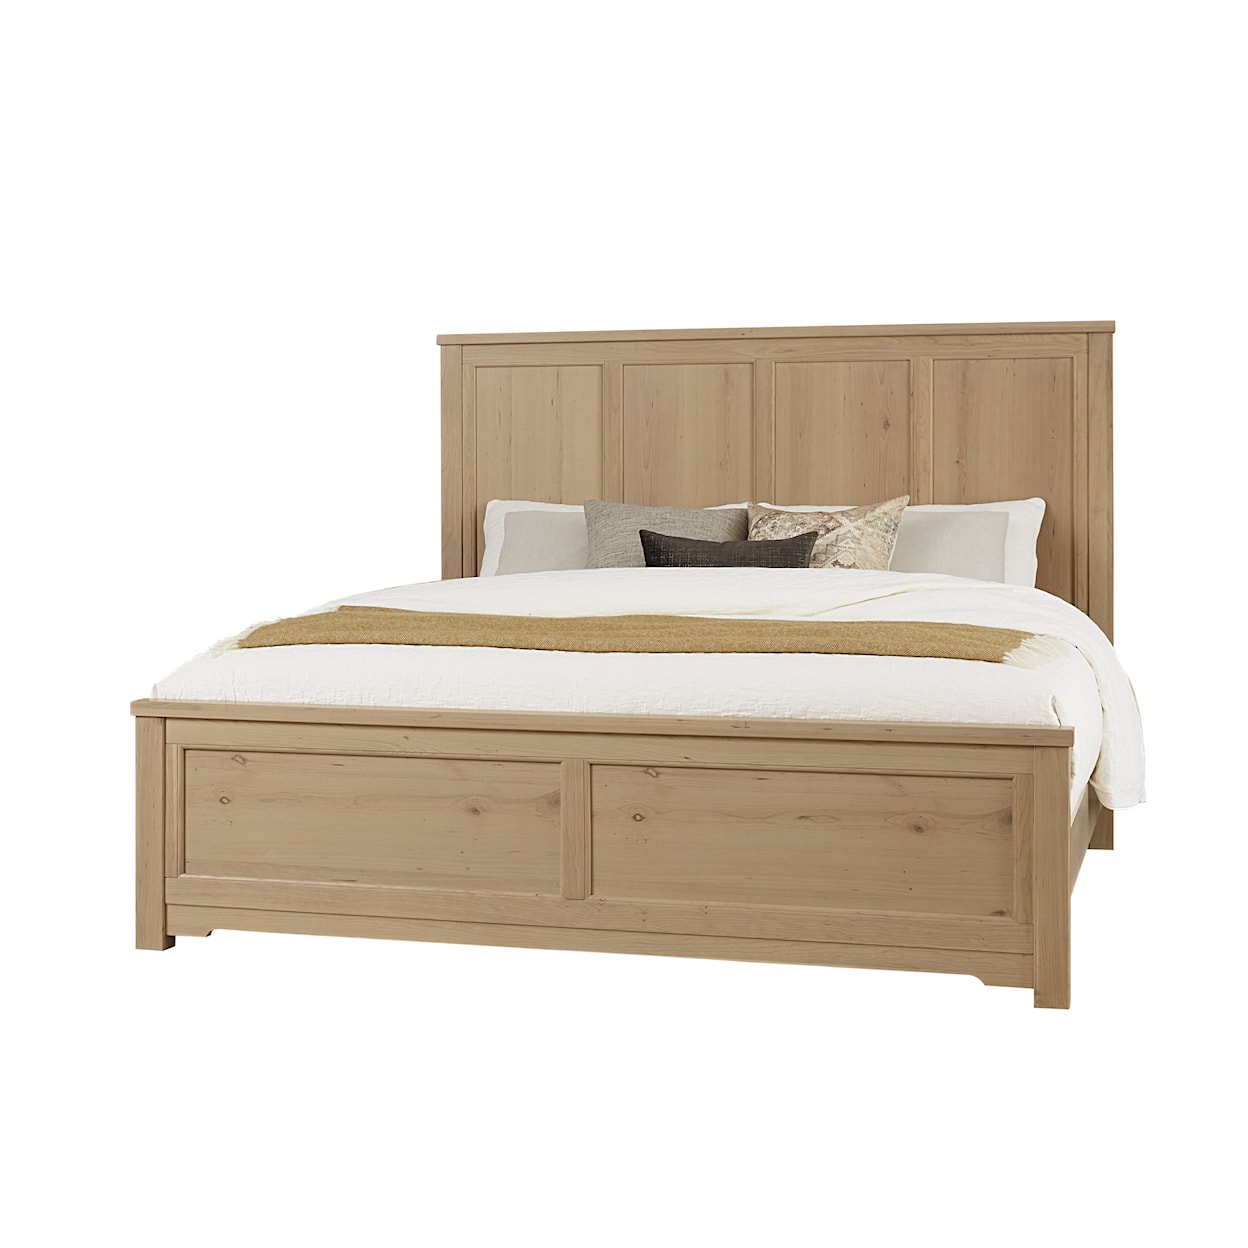 Artisan & Post Crafted Cherry Queen Six Panel Bed